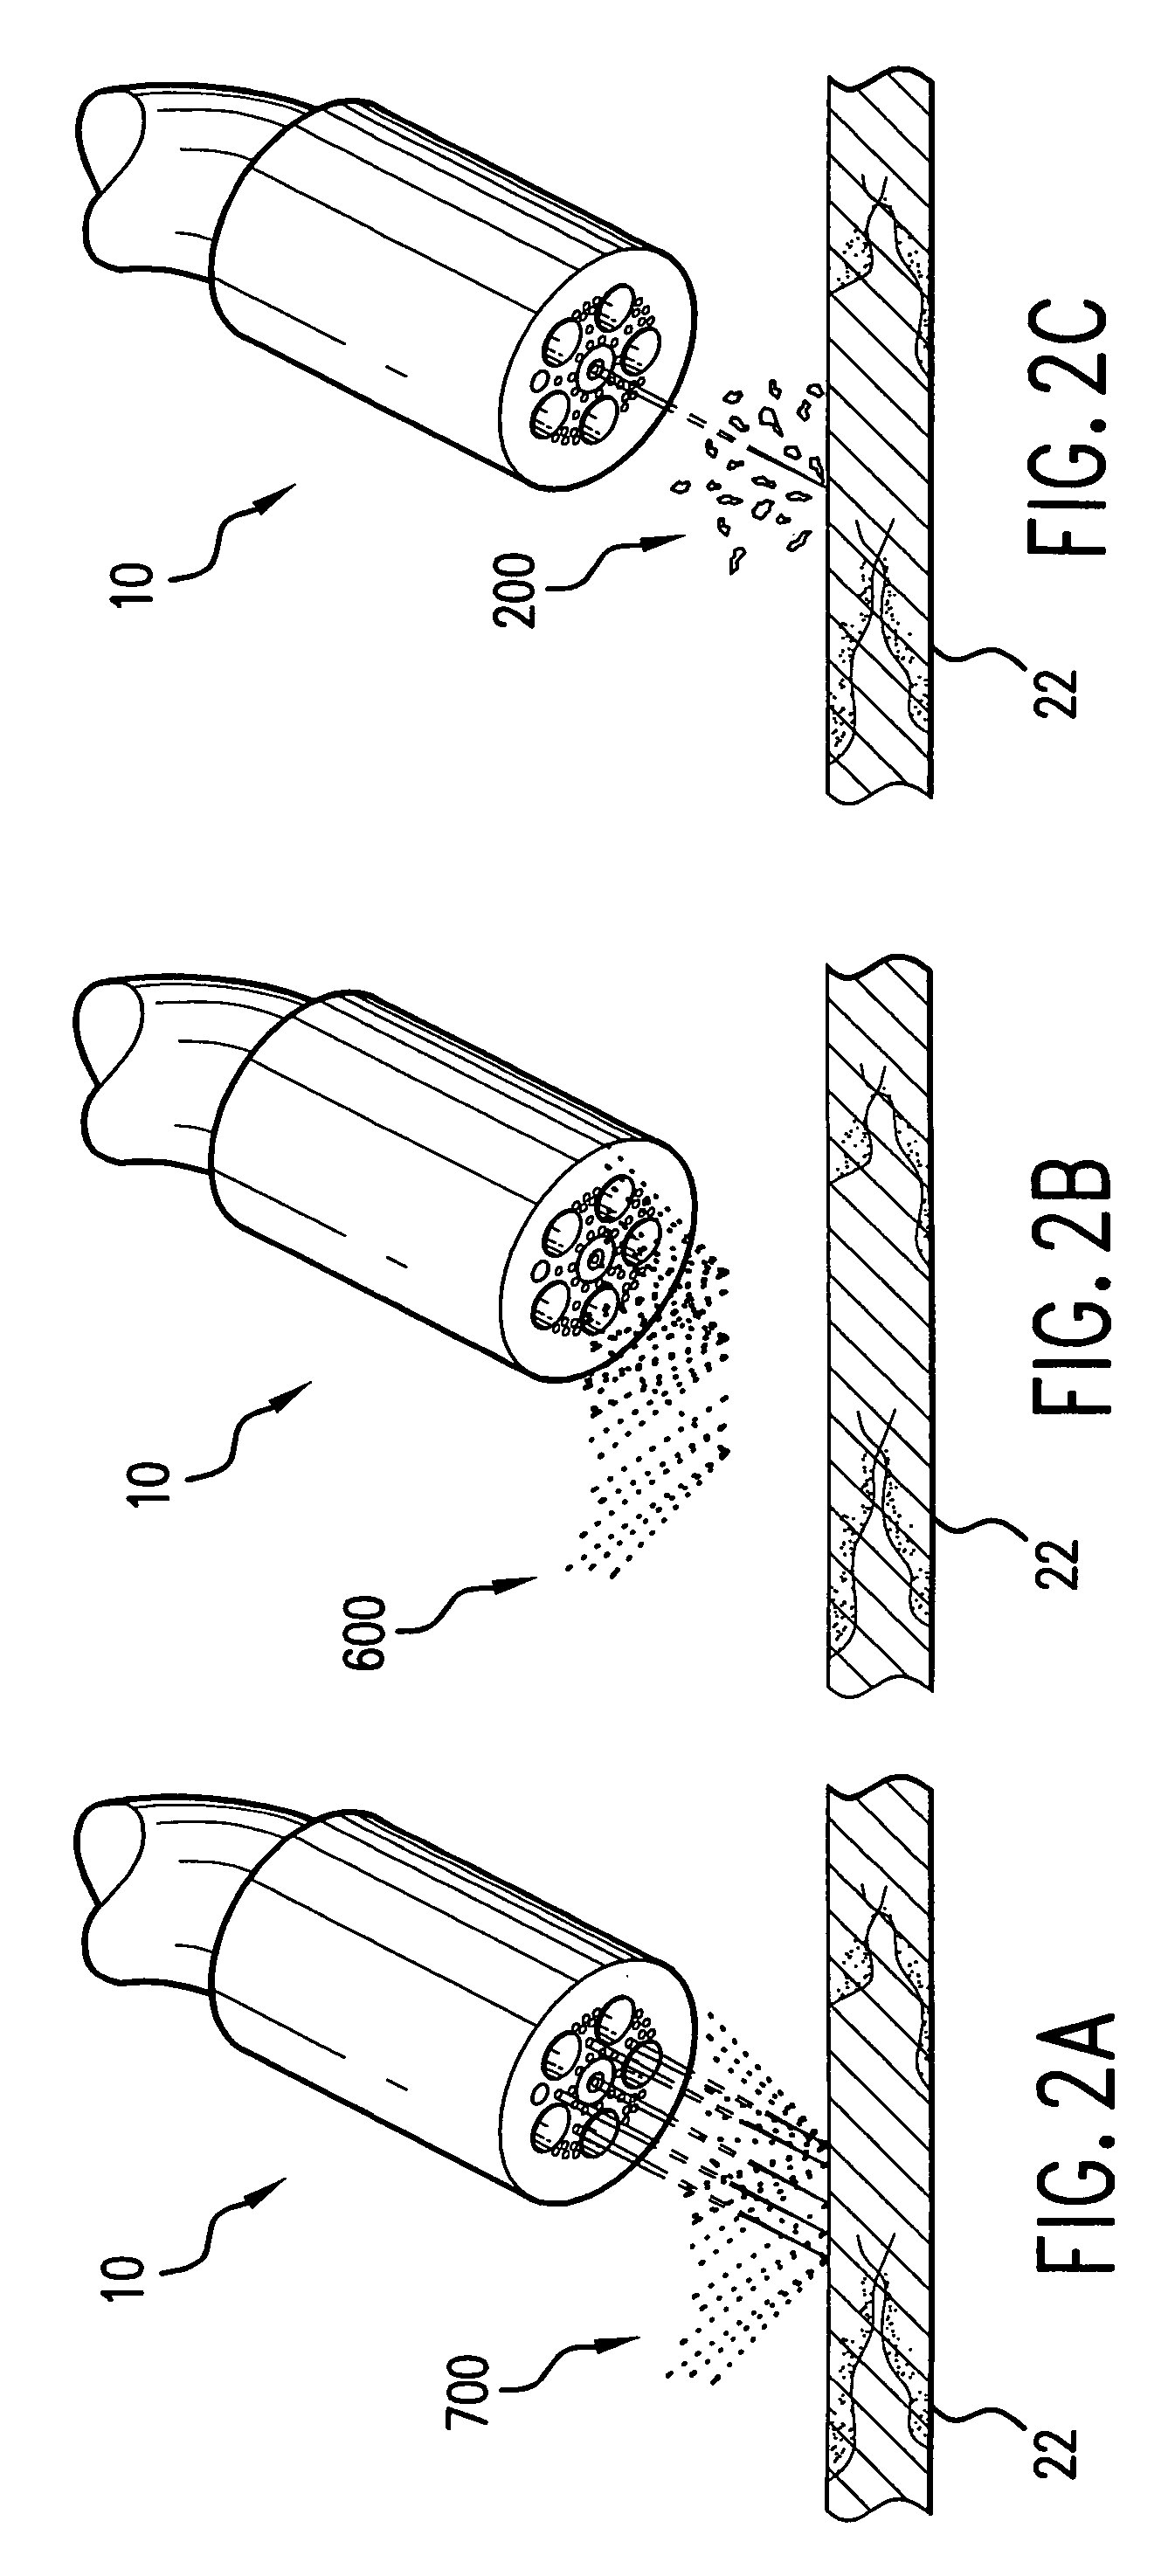 Architecture tool and methods of use